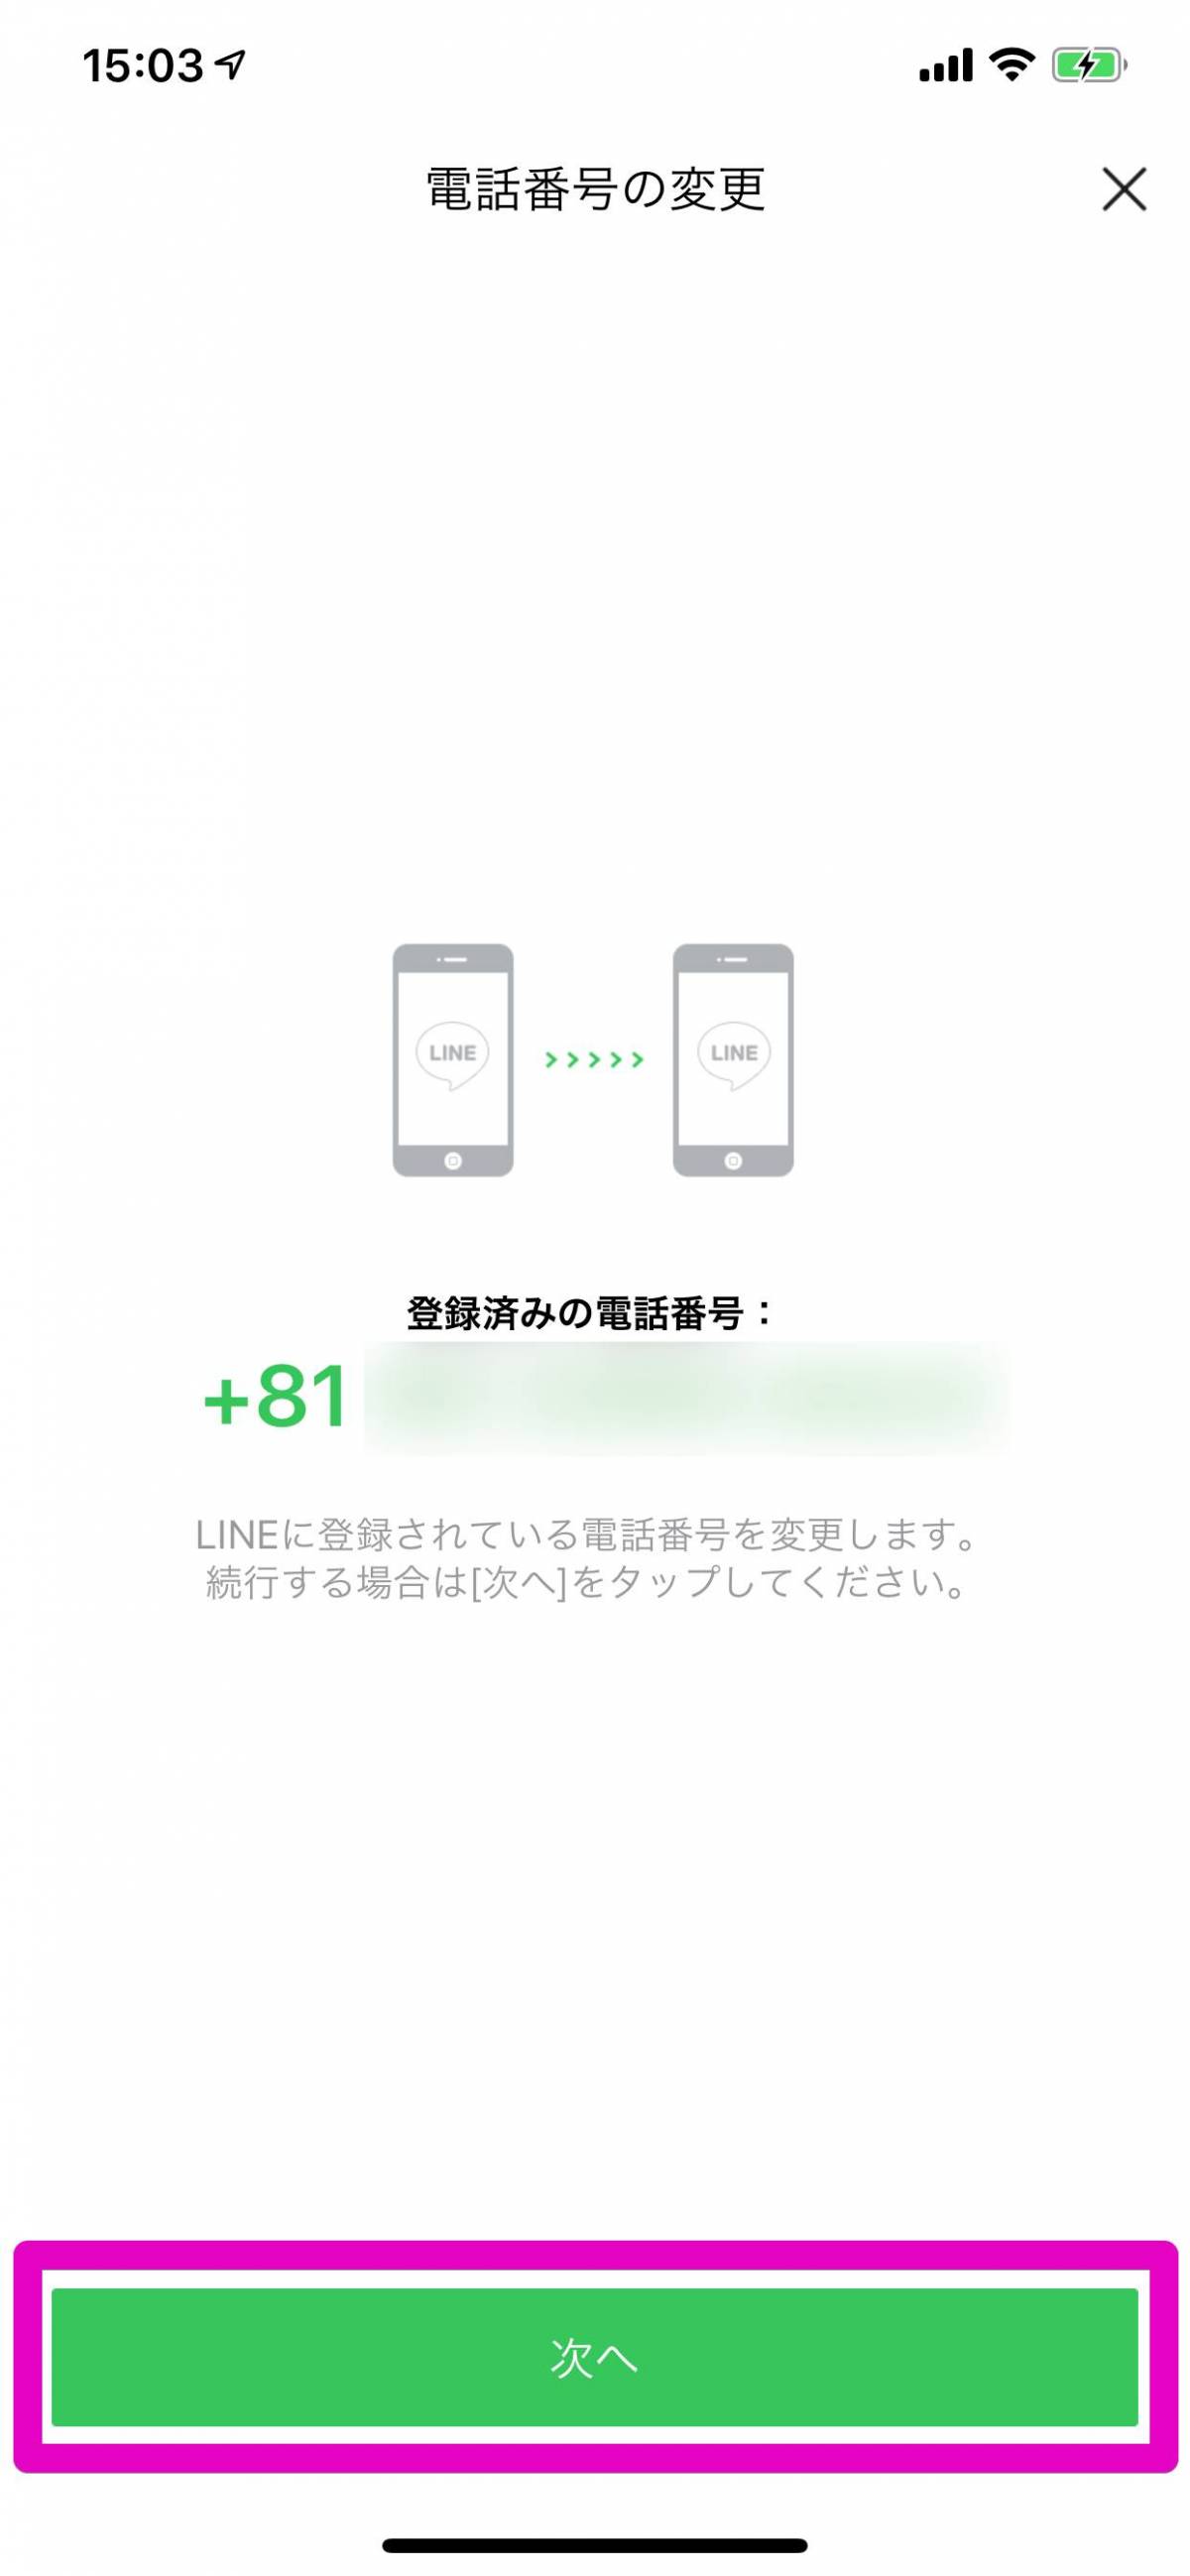 Lineに登録している電話番号を確認 変更する方法 Iphone Android Appliv Topics